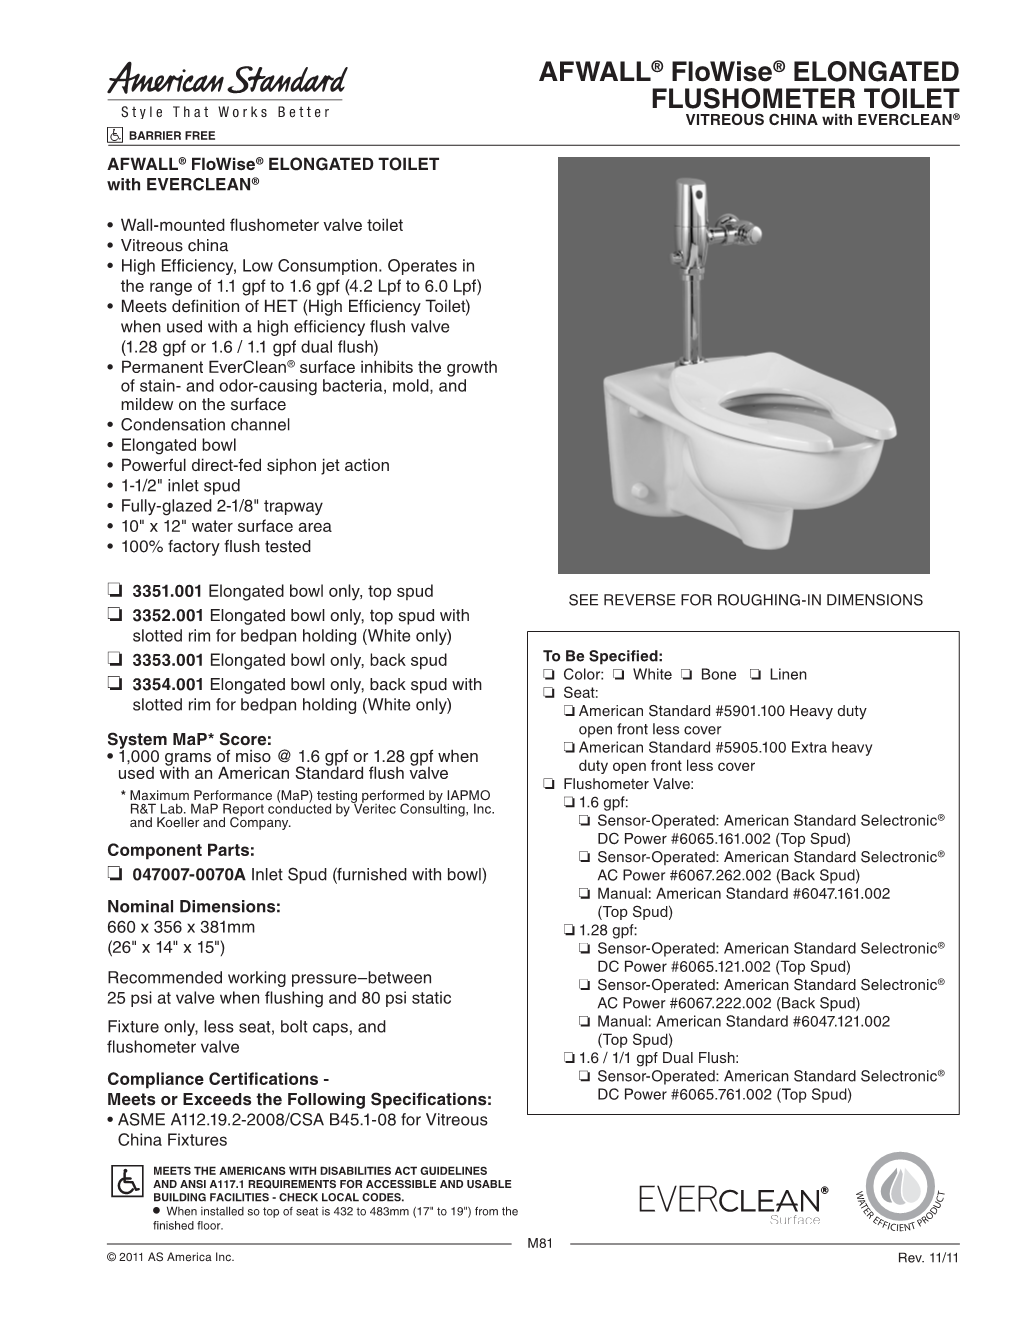 AFWALL® Flowise® ELONGATED FLUSHOMETER TOILET VITREOUS CHINA with EVERCLEAN® BARRIER FREE AFWALL® Flowise® ELONGATED TOILET with EVERCLEAN®